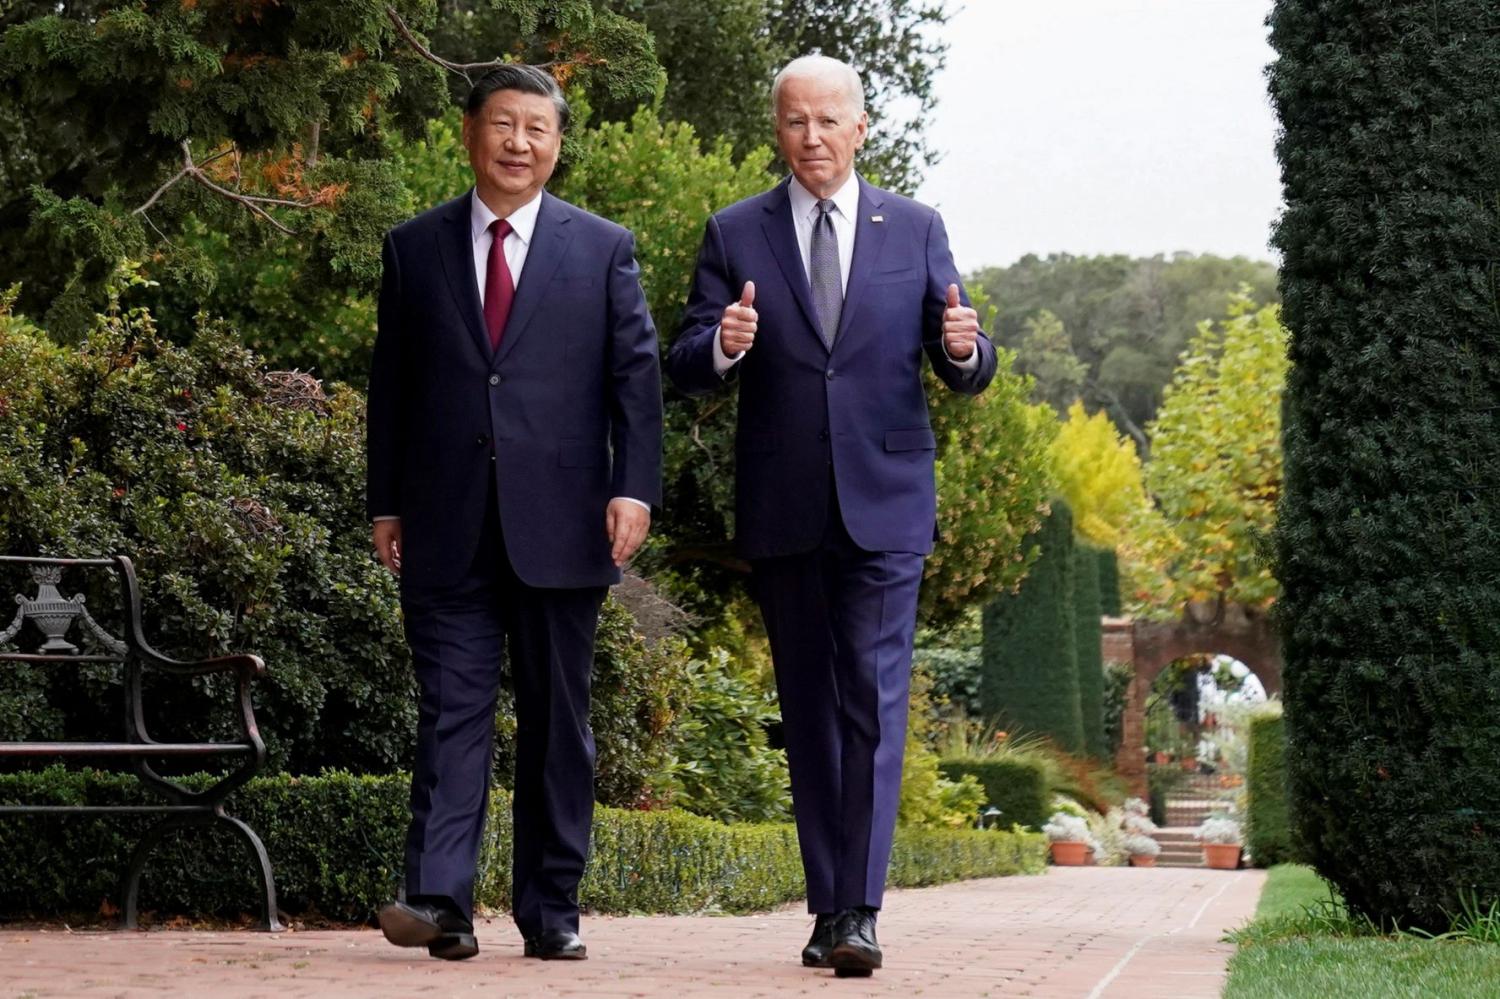 U.S. President Joe Biden gives thumbs-up as he walks with Chinese President Xi Jinping at Filoli estate on the sidelines of the Asia-Pacific Economic Cooperation (APEC) summit, in Woodside, California, U.S., November 15, 2023